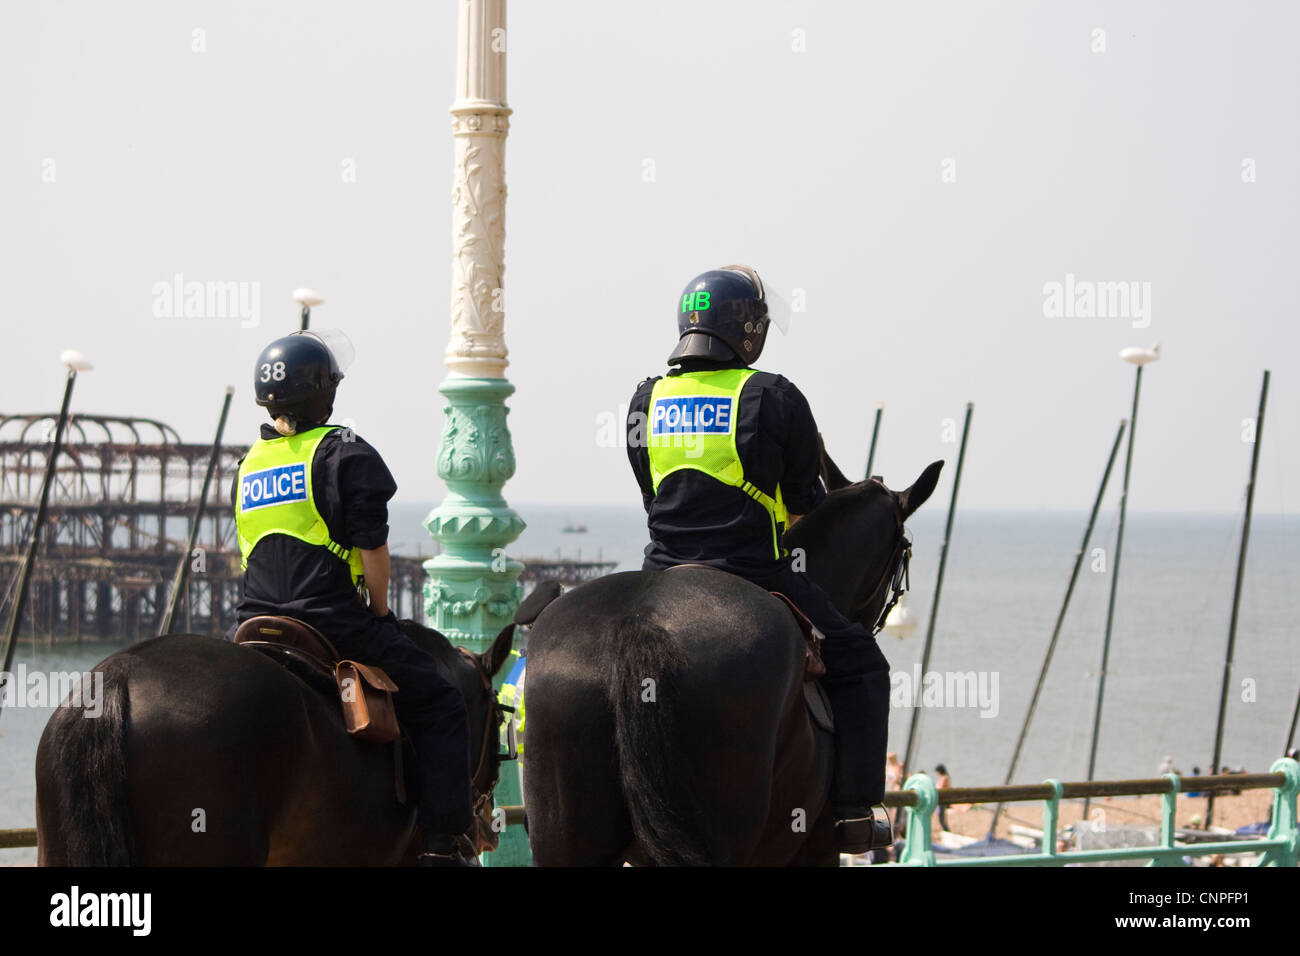 Two Police Officers on Police Horses patrolling Brighton Seafront after recent demonstrations by protesters. Stock Photo